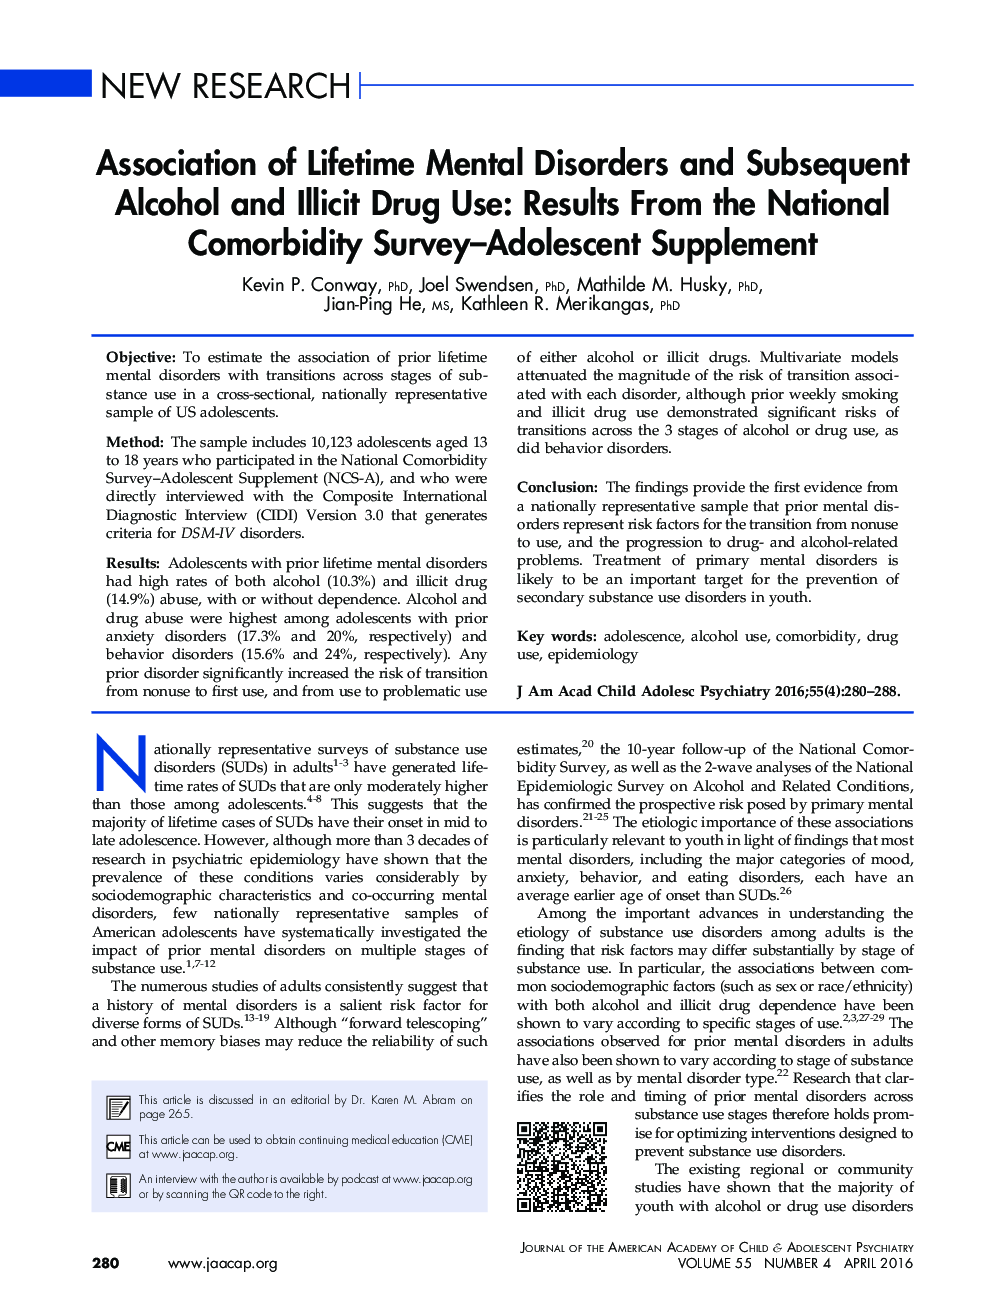 Association of Lifetime Mental Disorders and Subsequent Alcohol and Illicit Drug Use: Results From the National Comorbidity Survey–Adolescent Supplement 